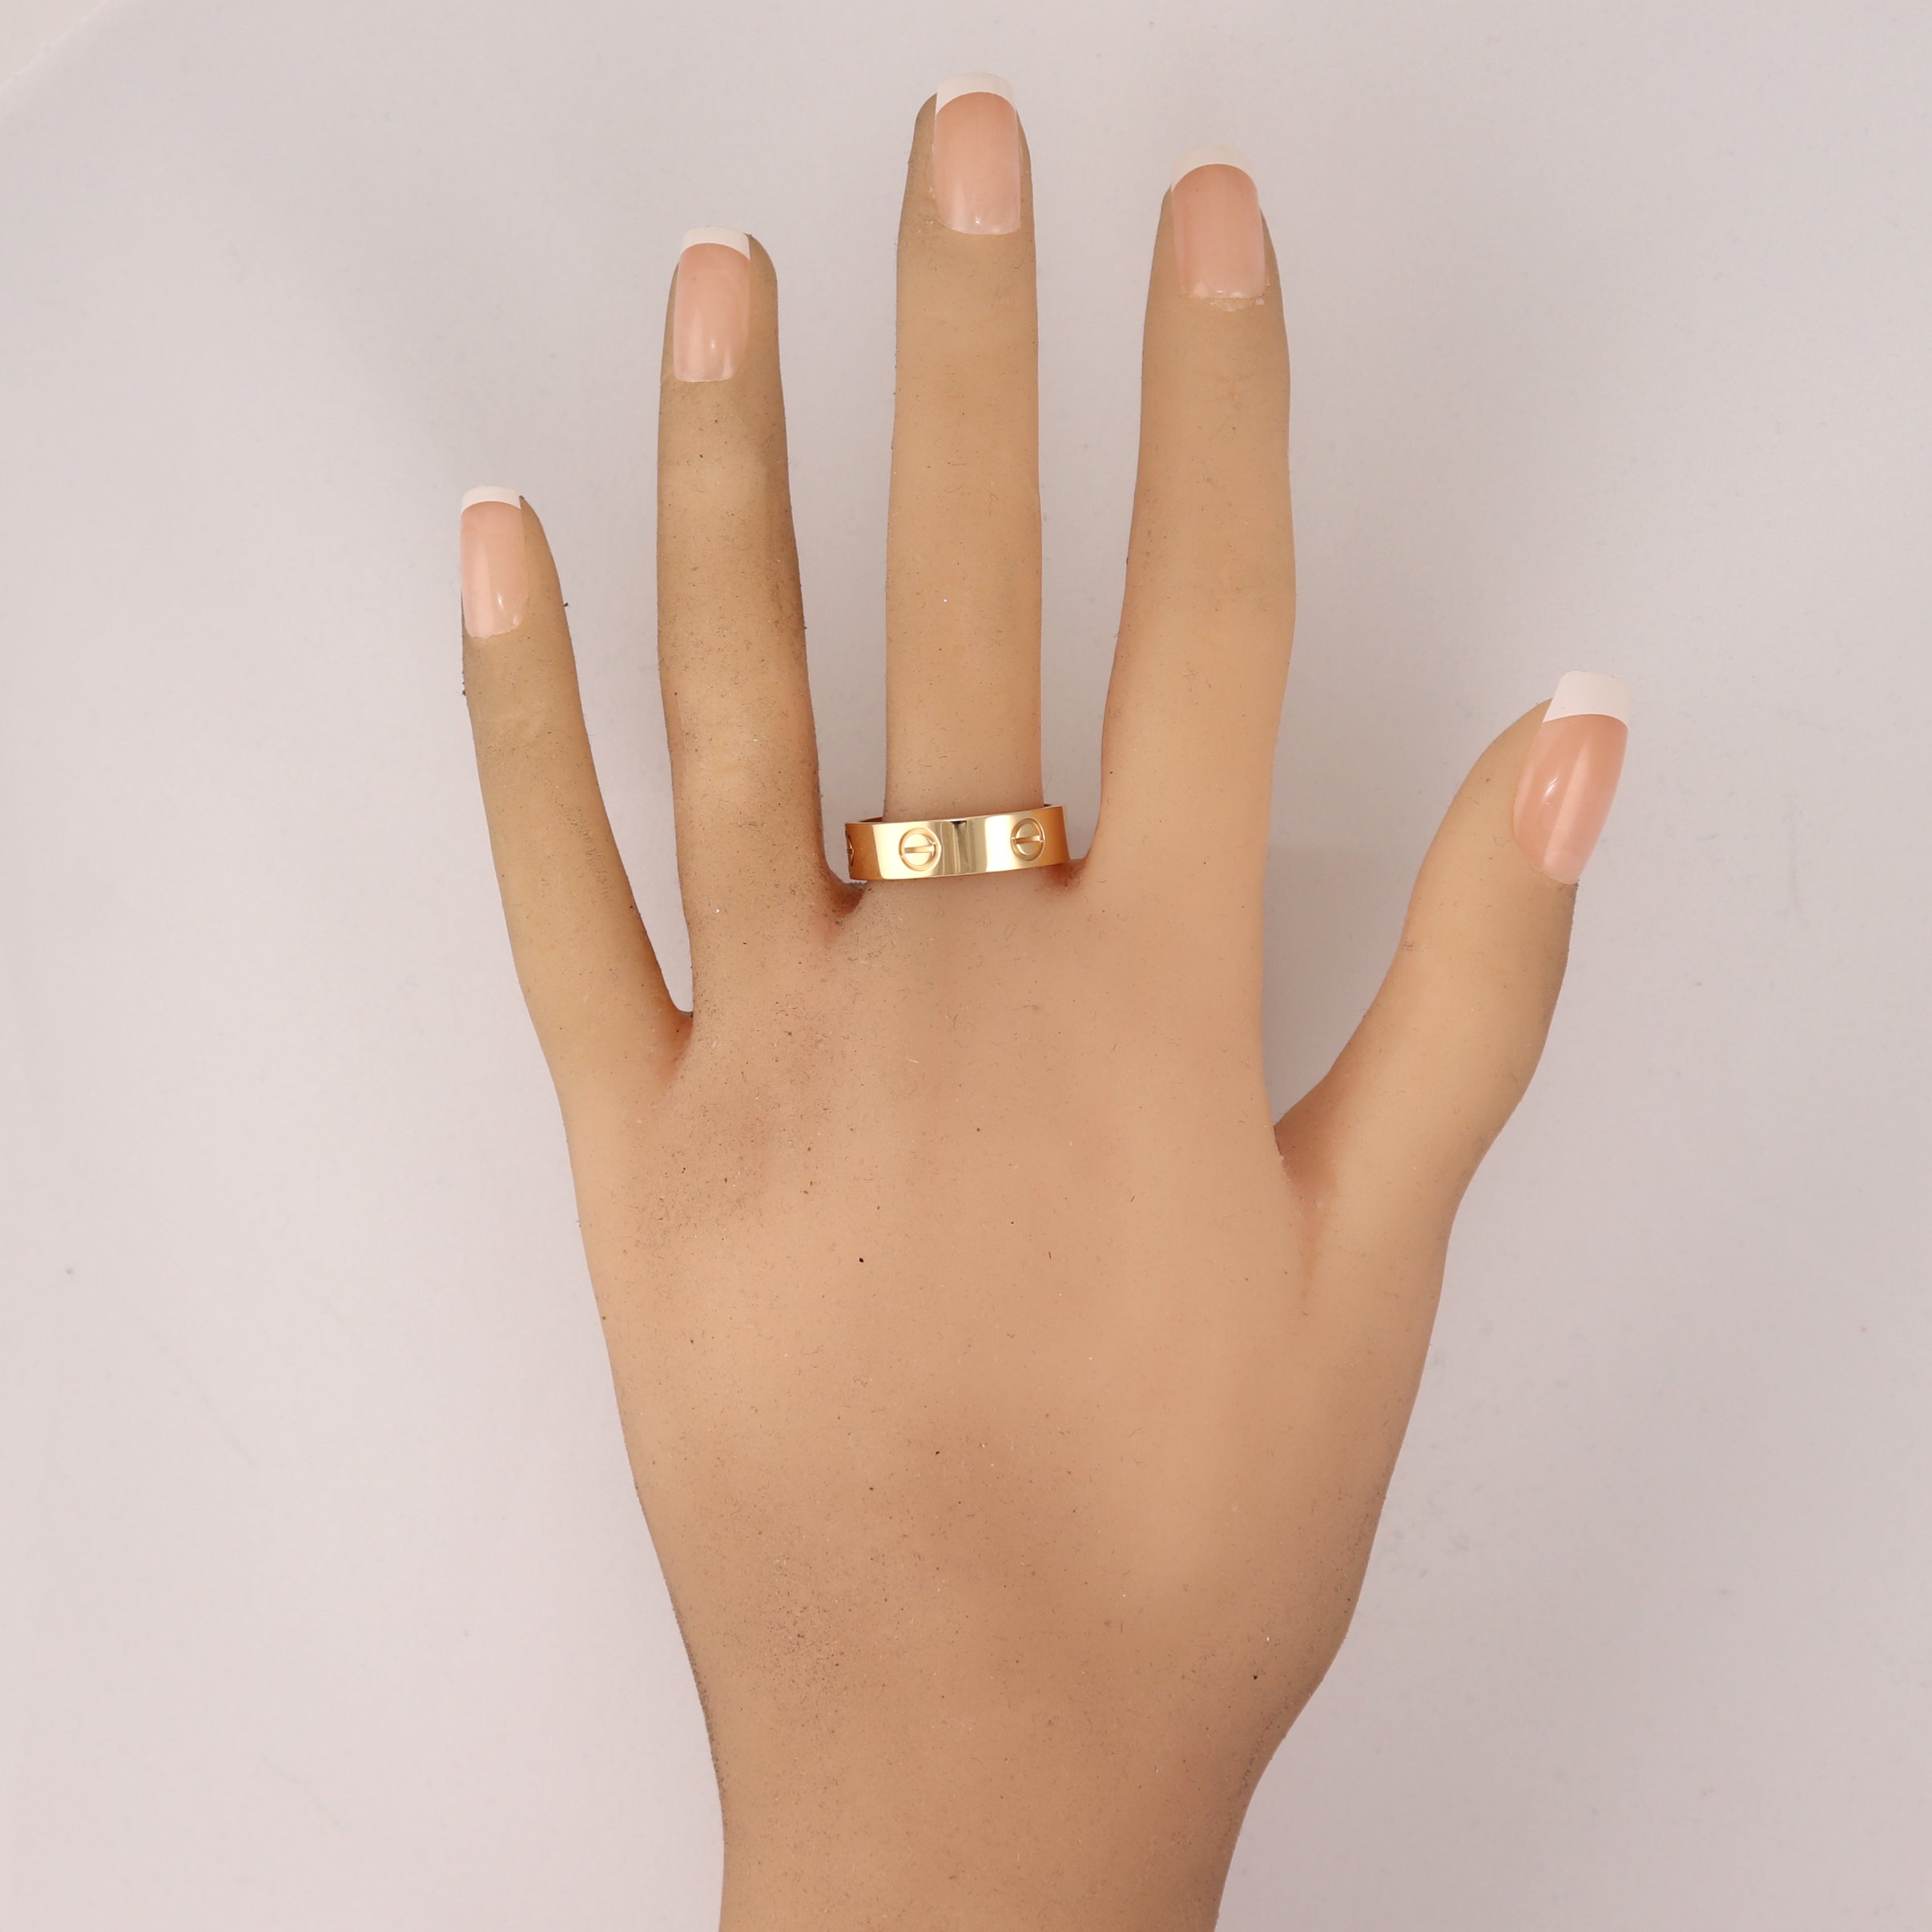 cartier love ring yellow gold with diamonds price